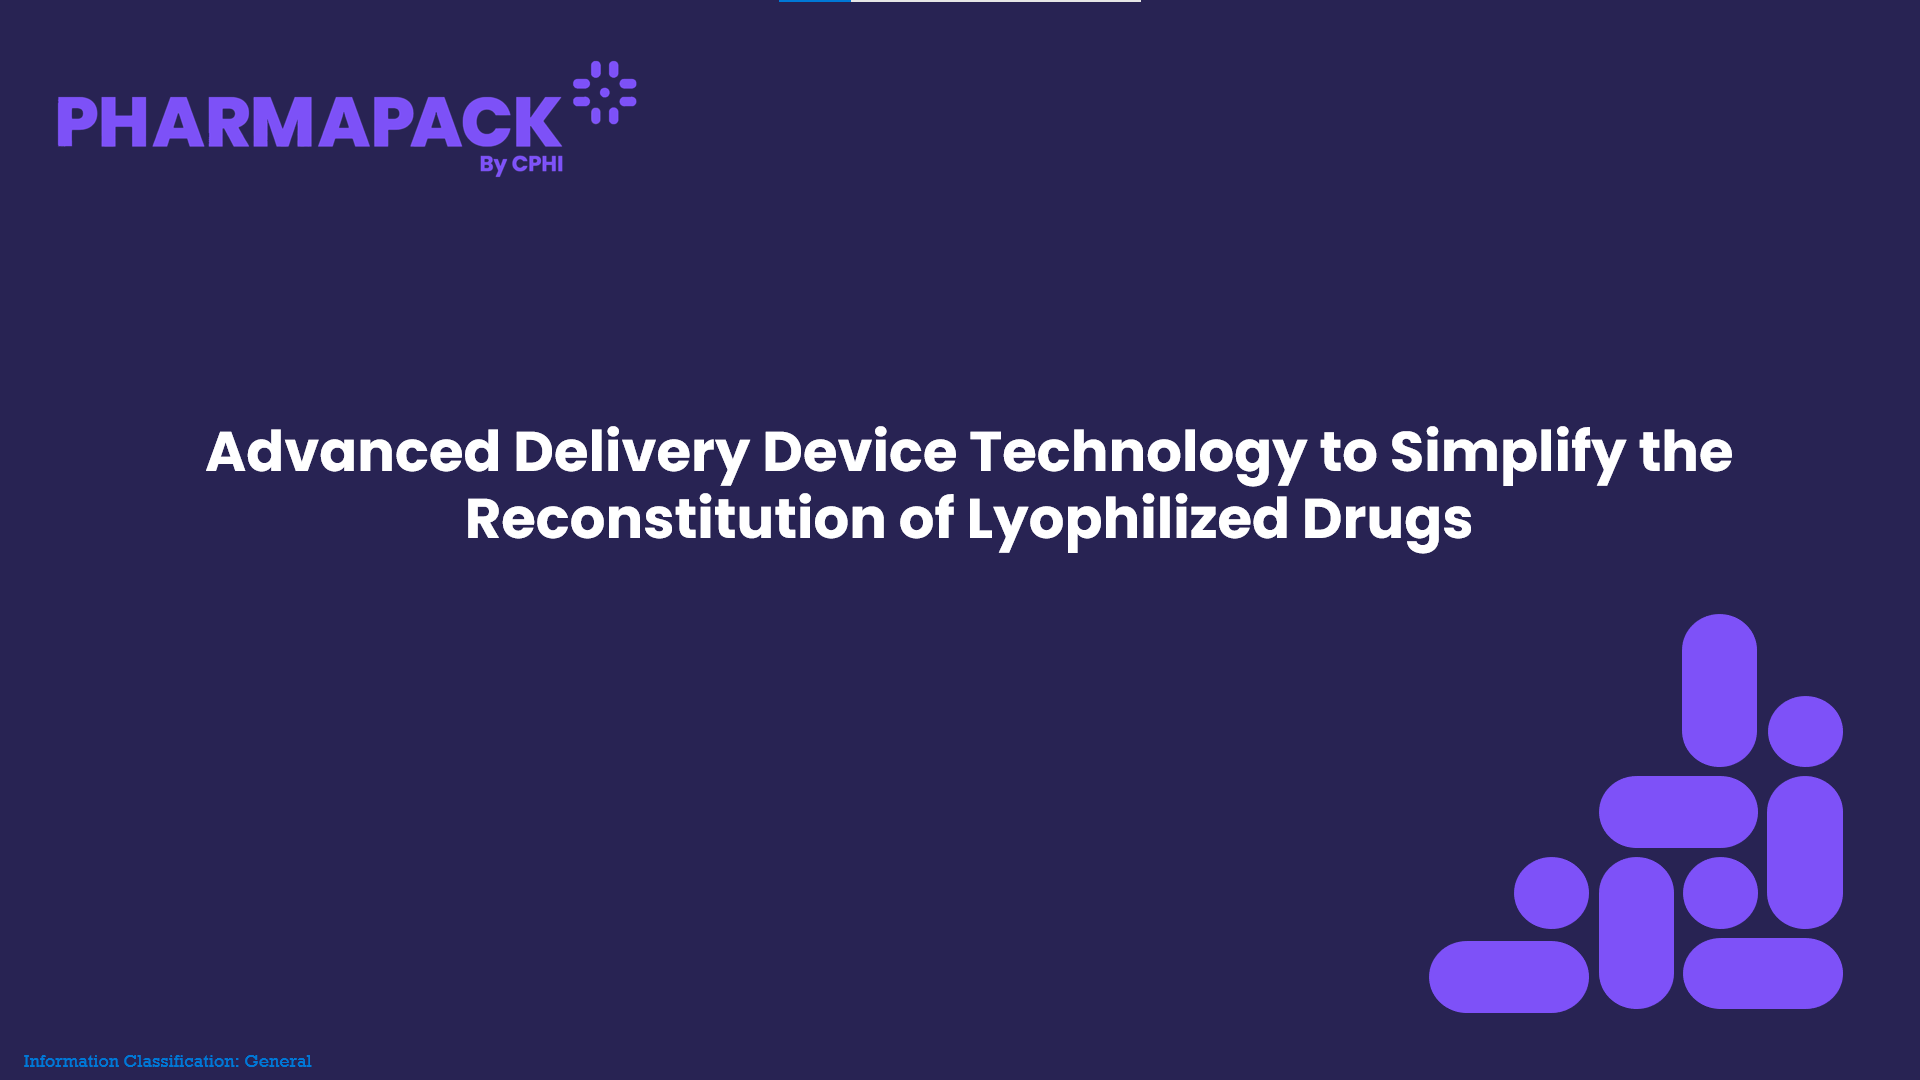 Advanced Delivery Device Technology to Simplify the Reconstitution of Lyophilized Drugs